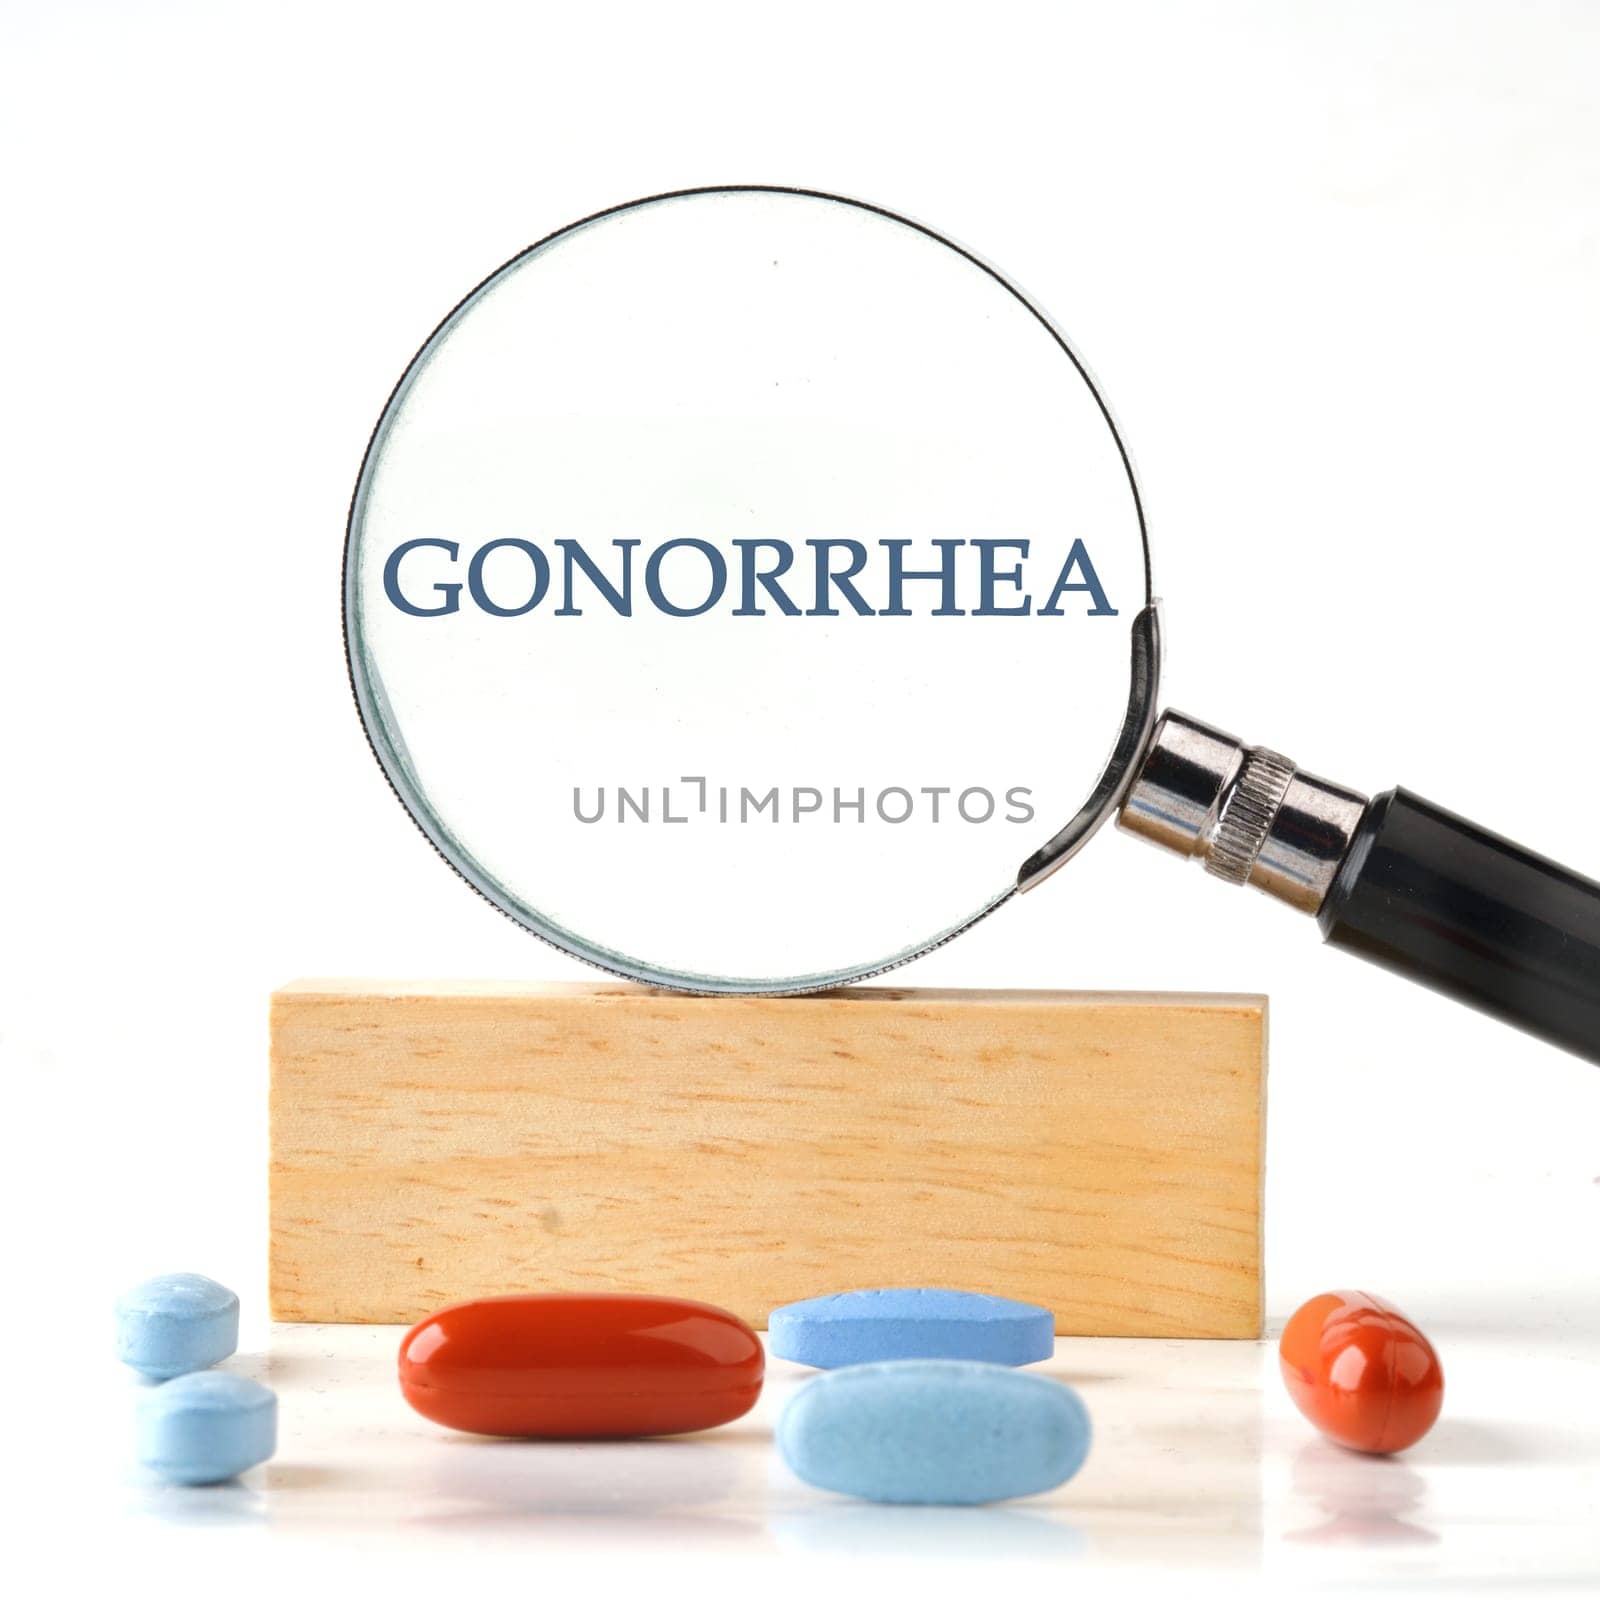 GONORRHEA word through a magnifying glass on a wooden block with vitamins, pills in the foreground